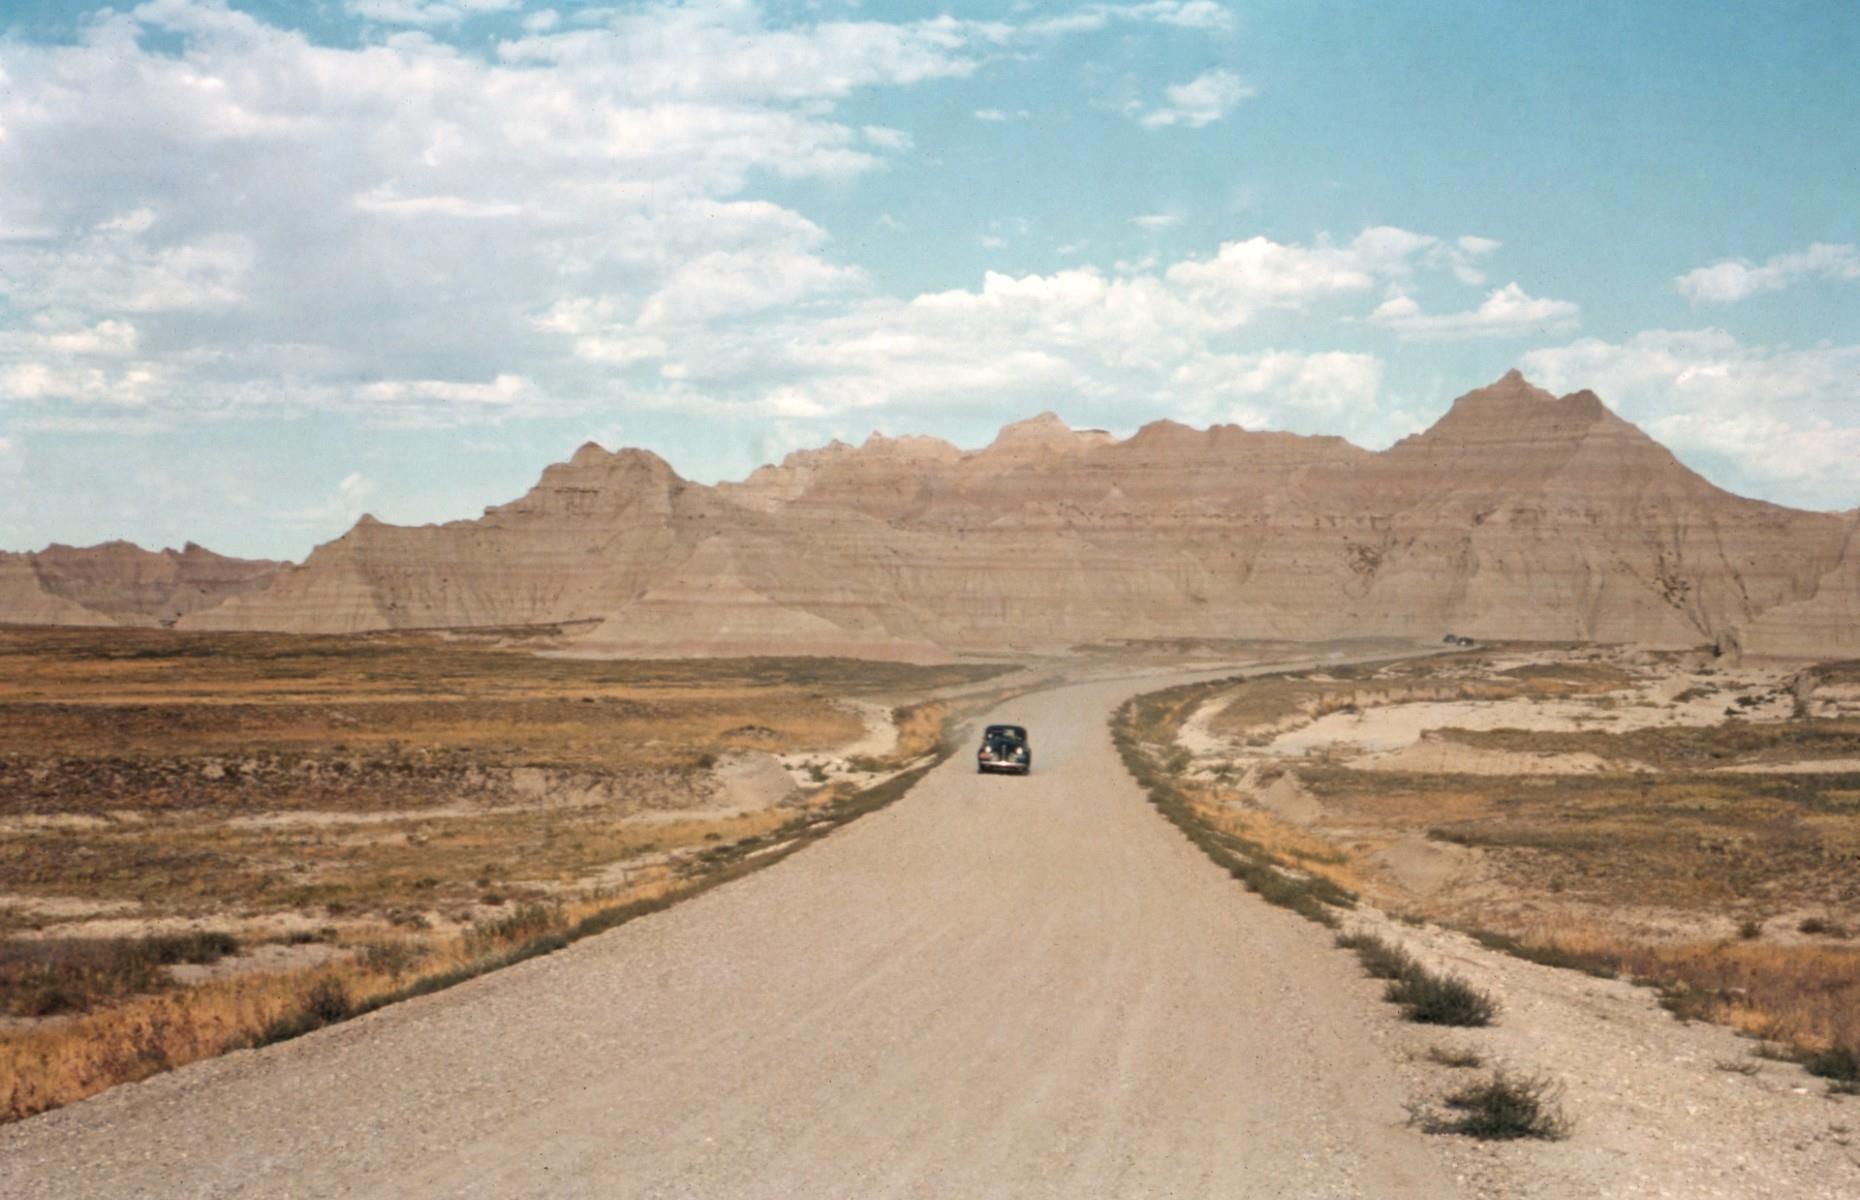 <p>The striated peaks of the Badlands, South Dakota are just as striking in this rudimentary color photograph as they are today. The national park (then a national monument) was located close to US Highways 14 and 6, so when roads were built through it during the 1930s and 1940s there was a significant uptick in visitor numbers.</p>  <p><a href="https://www.loveexploring.com/galleries/121388/historic-images-of-world-famous-holiday-destinations?page=1"><strong>Next, check out these vintage photographs of world-famous destinations</strong></a></p>